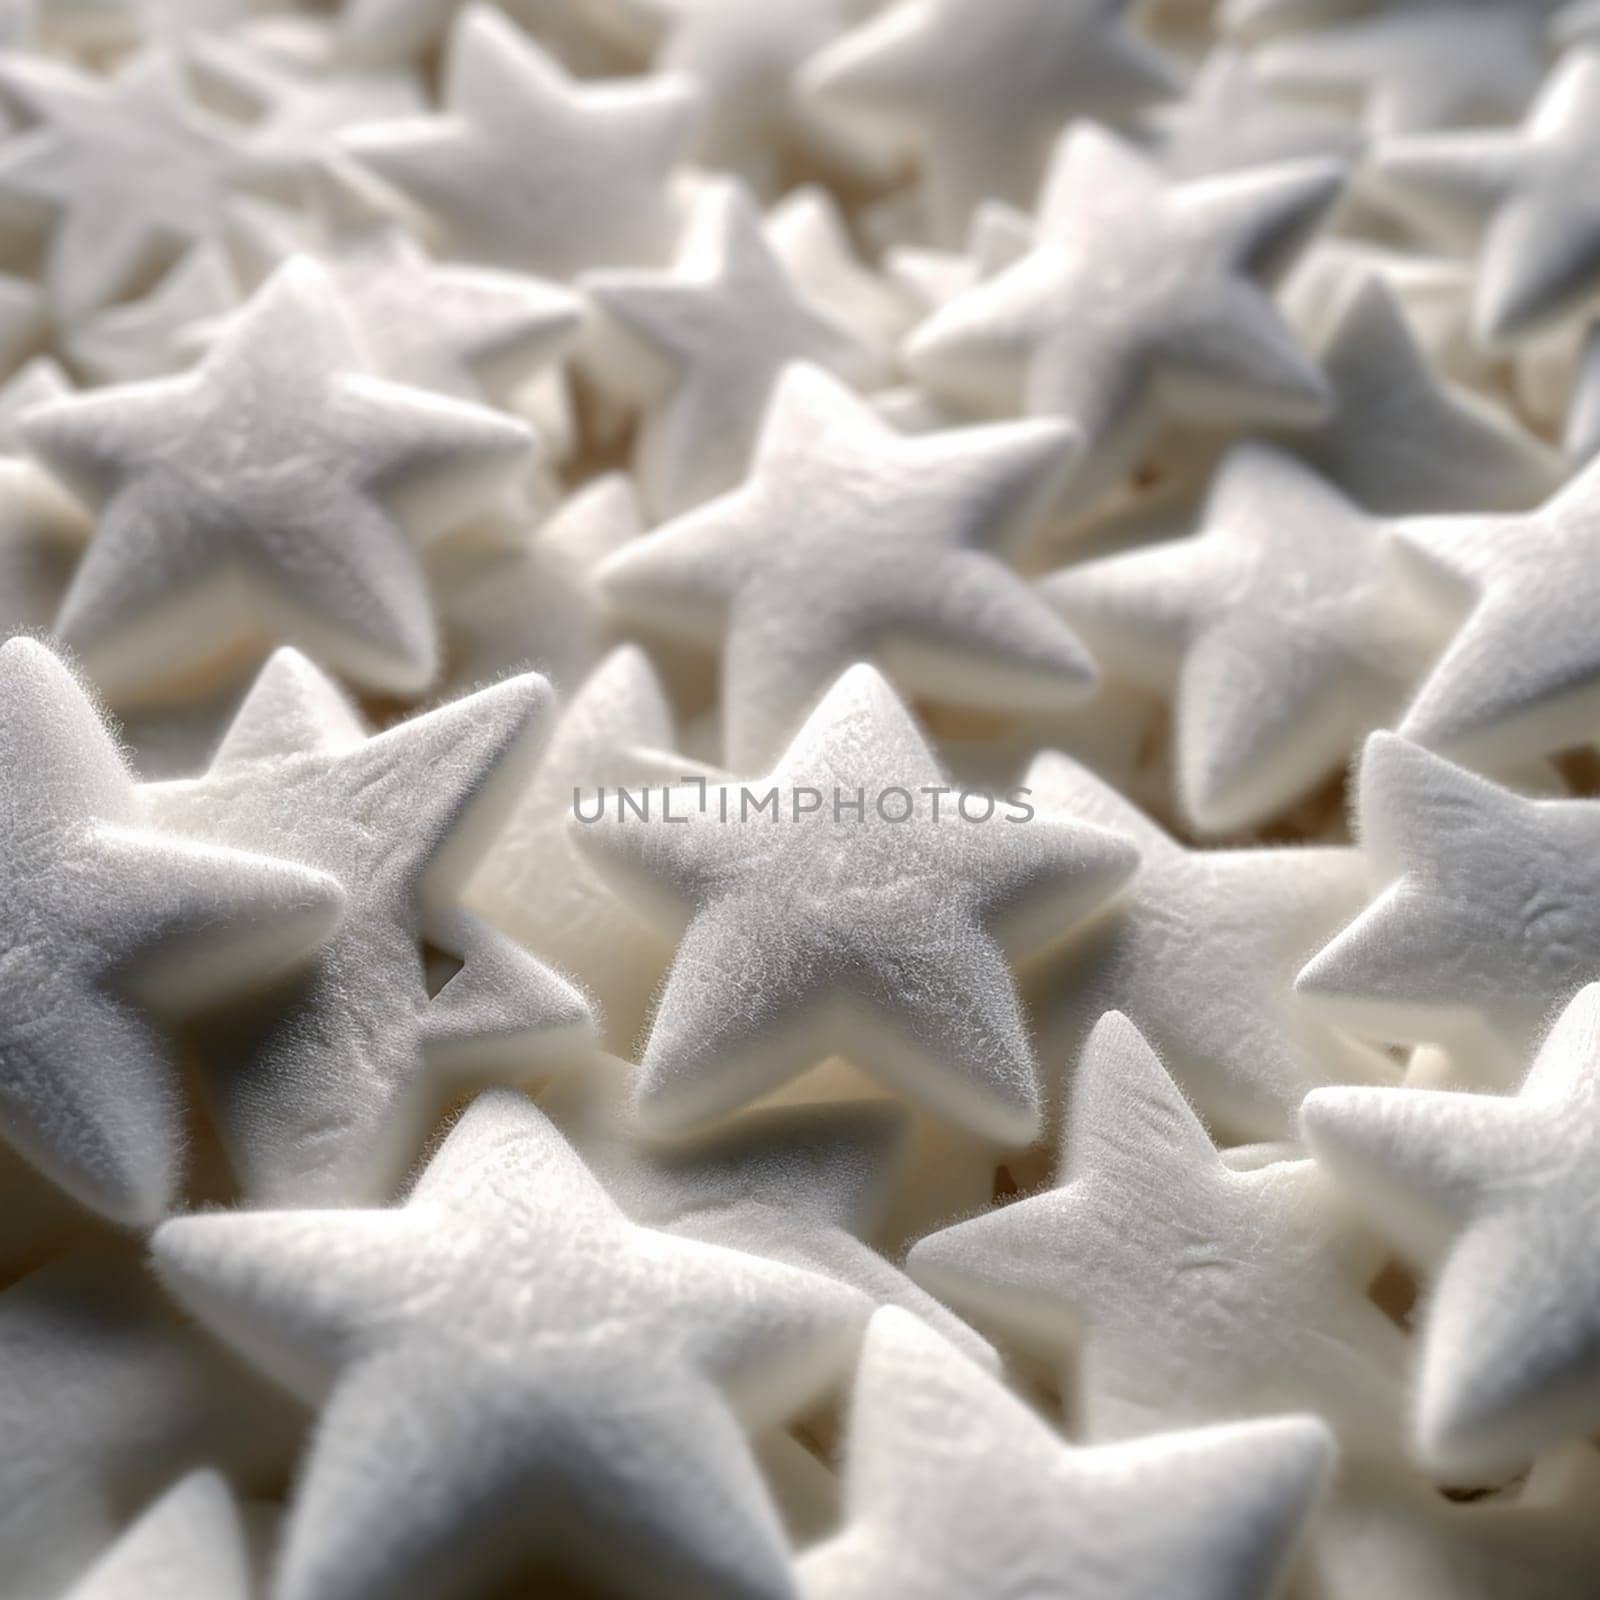 Numerous white star shaped objects clustered together. by Hype2art